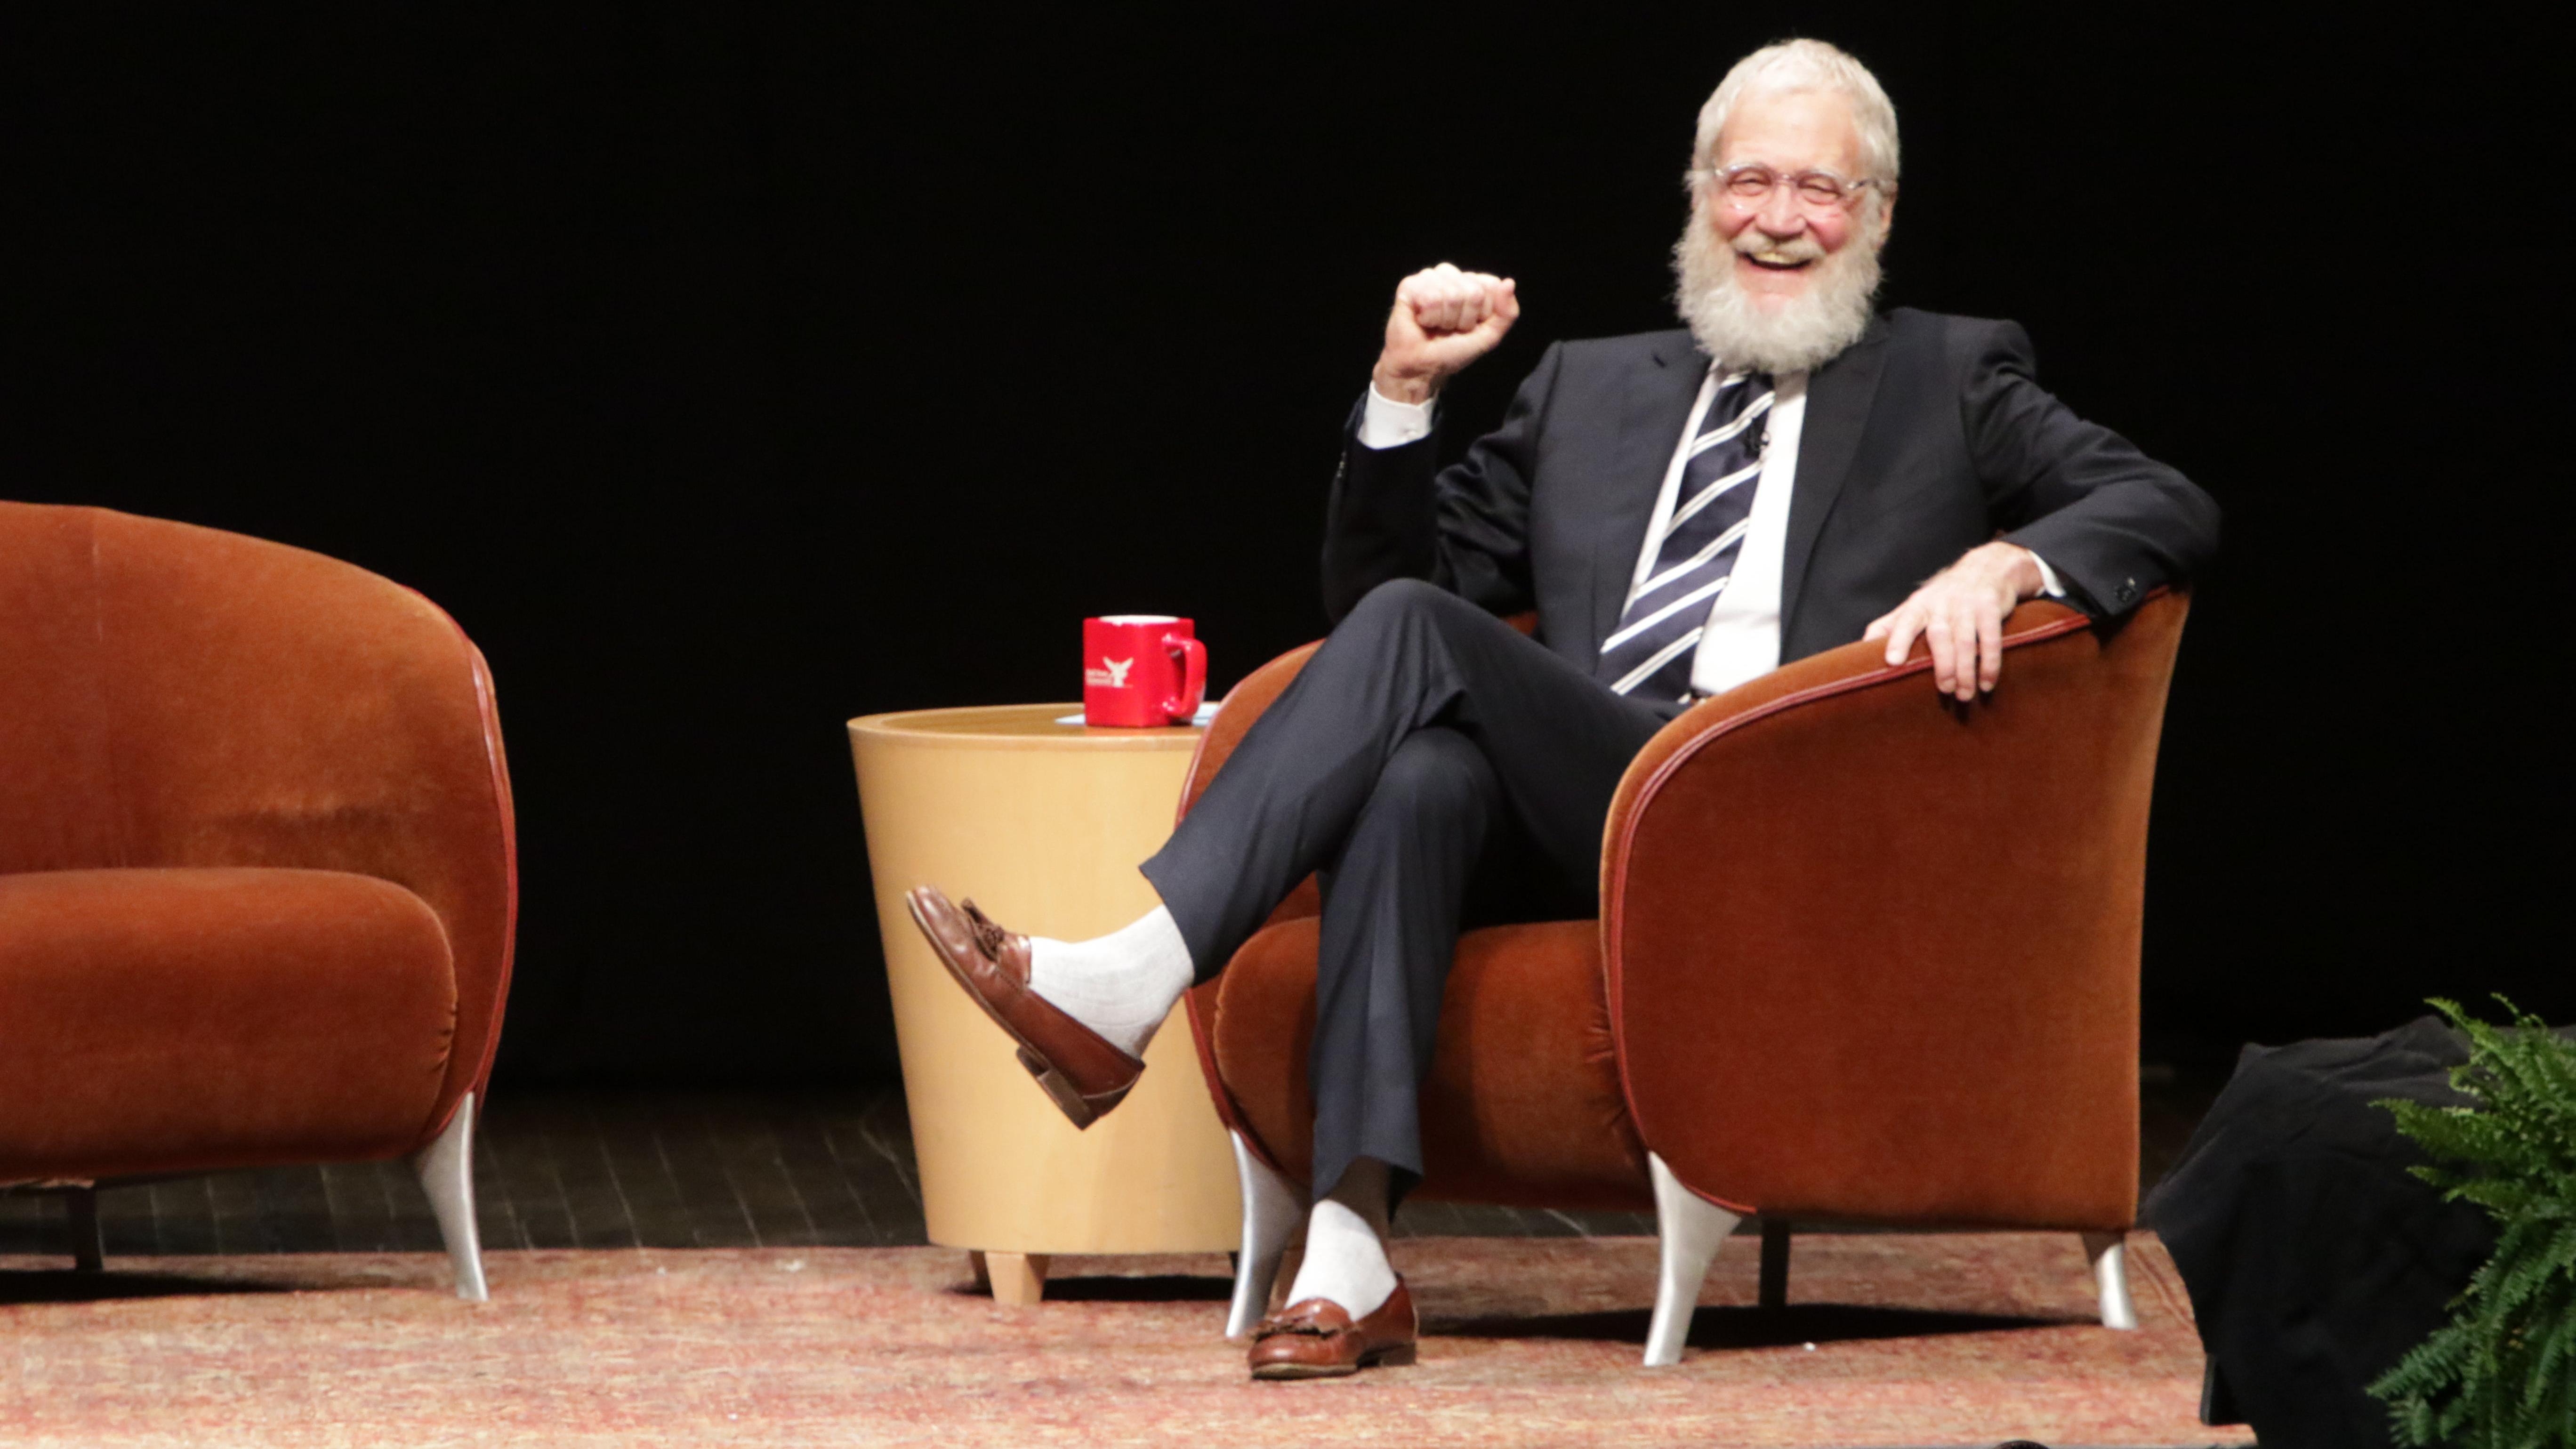 Seth Meyers announces some guy named David Letterman for Late Night‘s 40th anniversary show